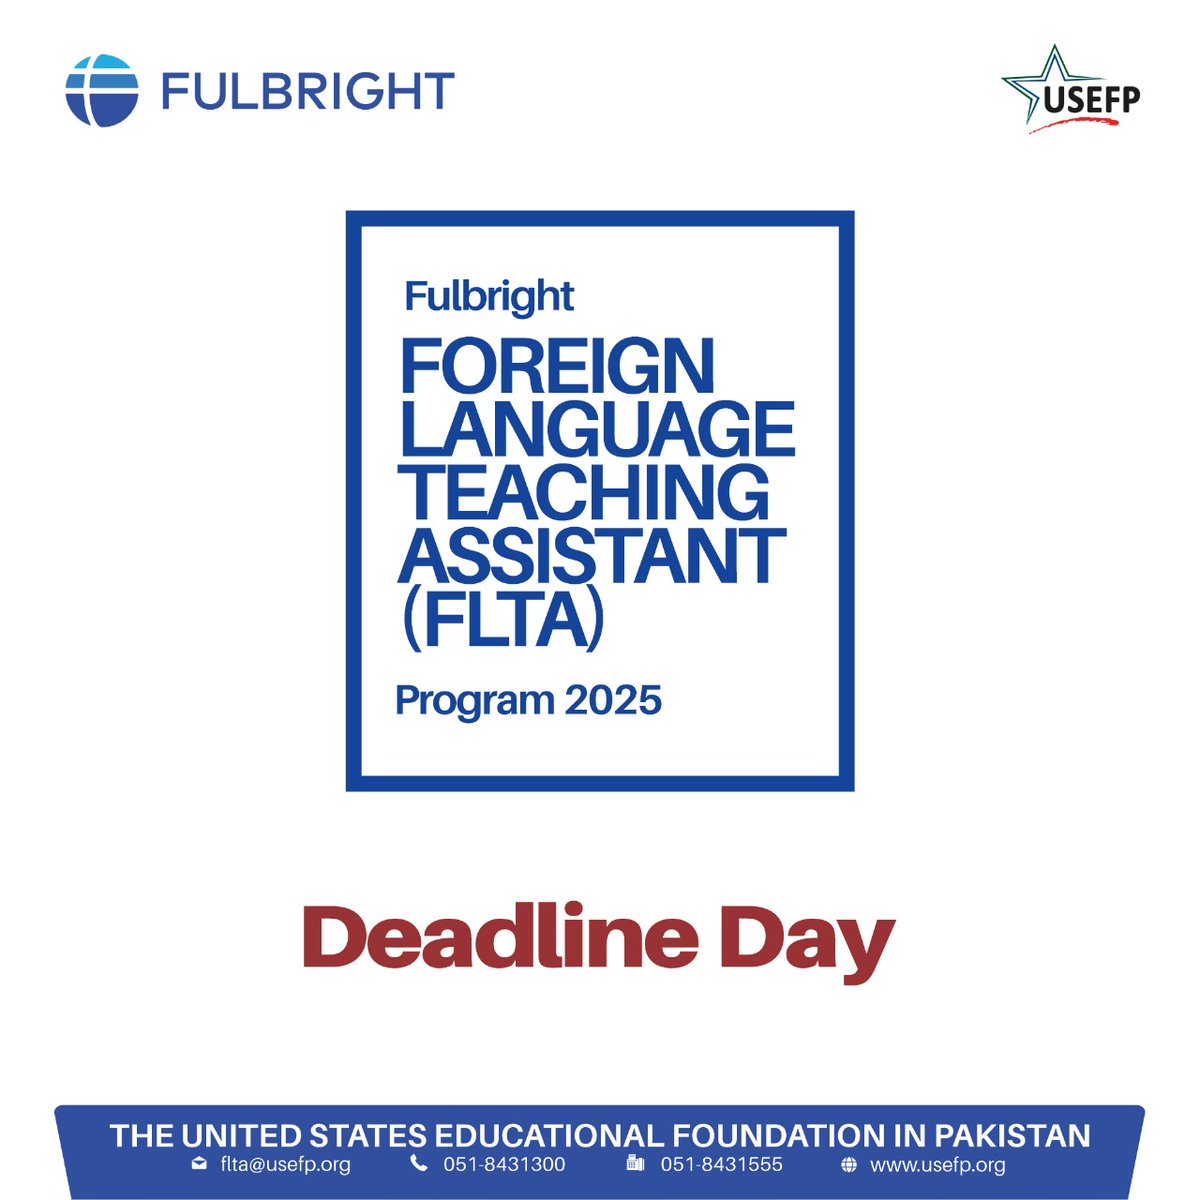 The application deadline for the 2025 Fulbright Foreign Language Teaching Assistant (FLTA) Program is today! The deadline expires at 11:59 pm (Pakistan Standard Time). For details, visit usefp.org #USEFP #Fulbright #FLTA #English #Scholarship #Deadline #USPAK